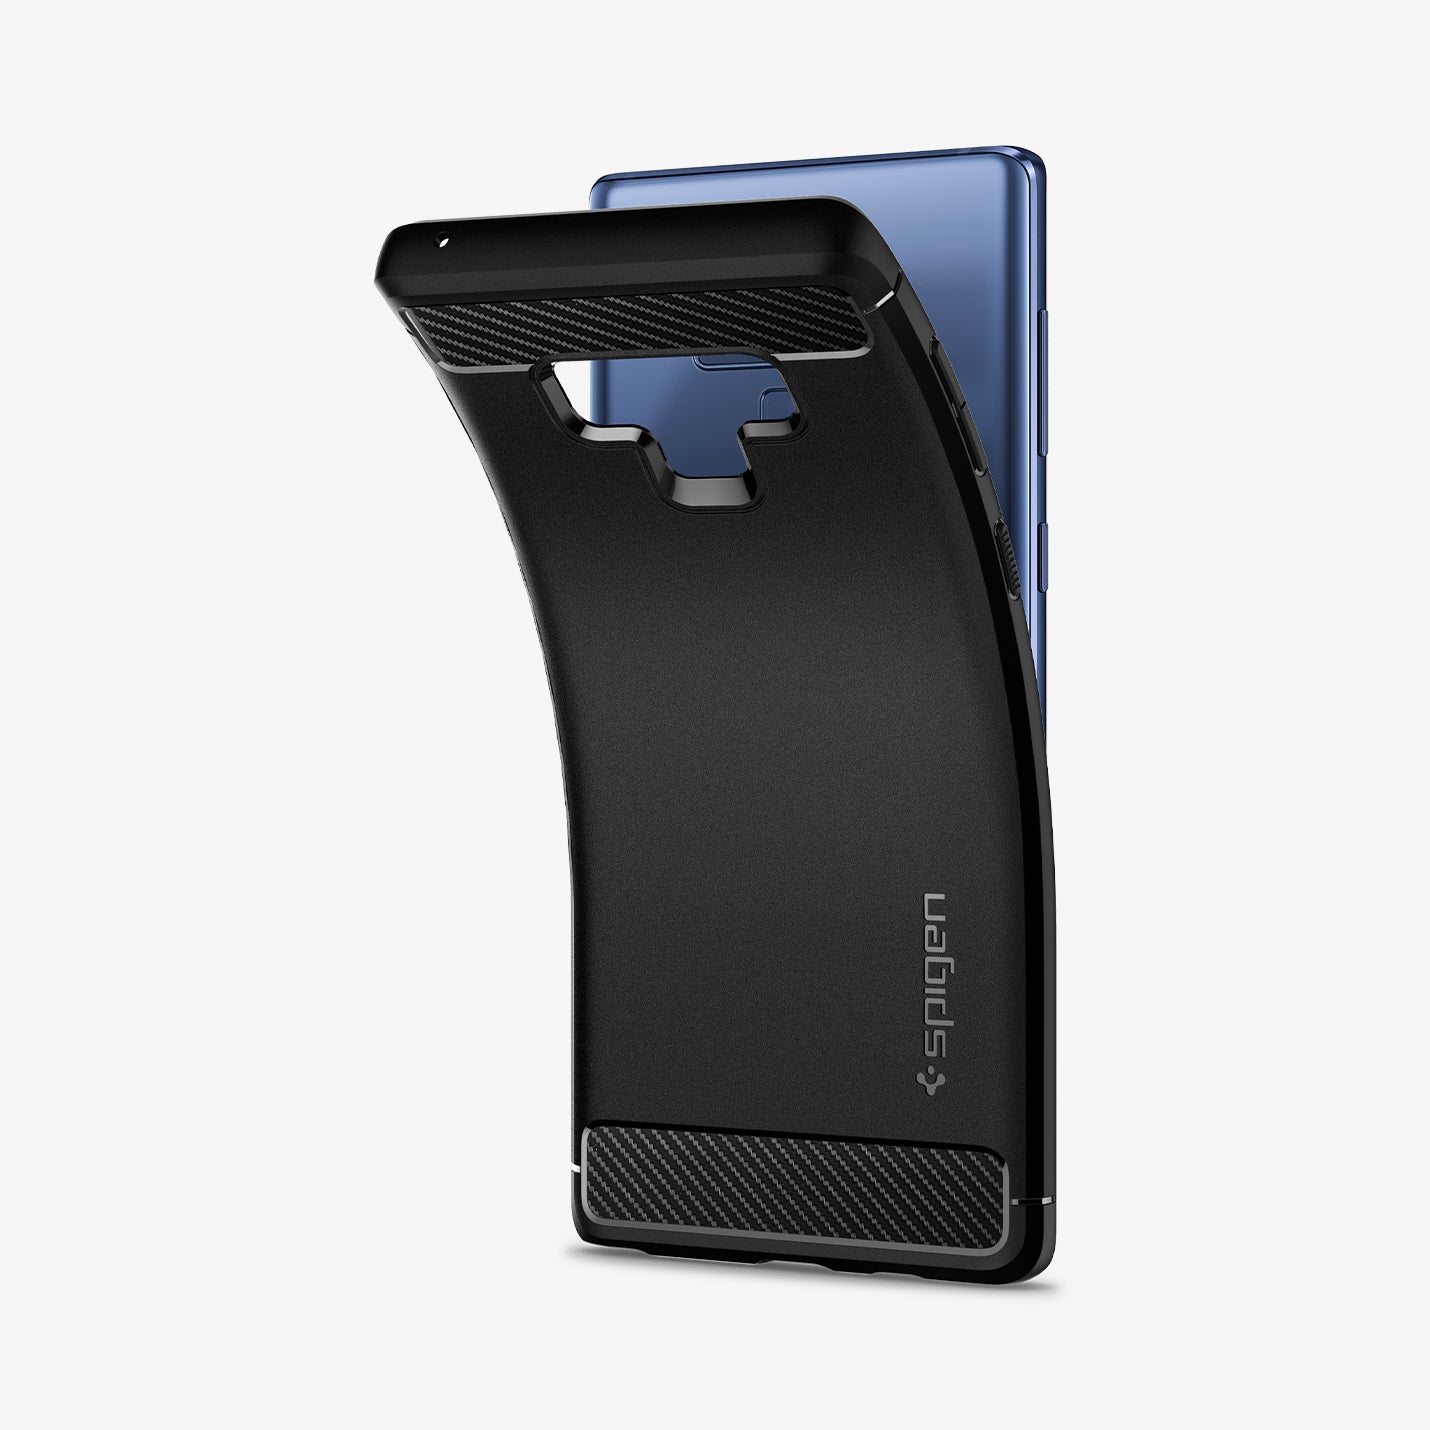 599CS24572 - Galaxy Note 9 Case Rugged Armor in matte black showing the back with case bending away from device to show the flexibility